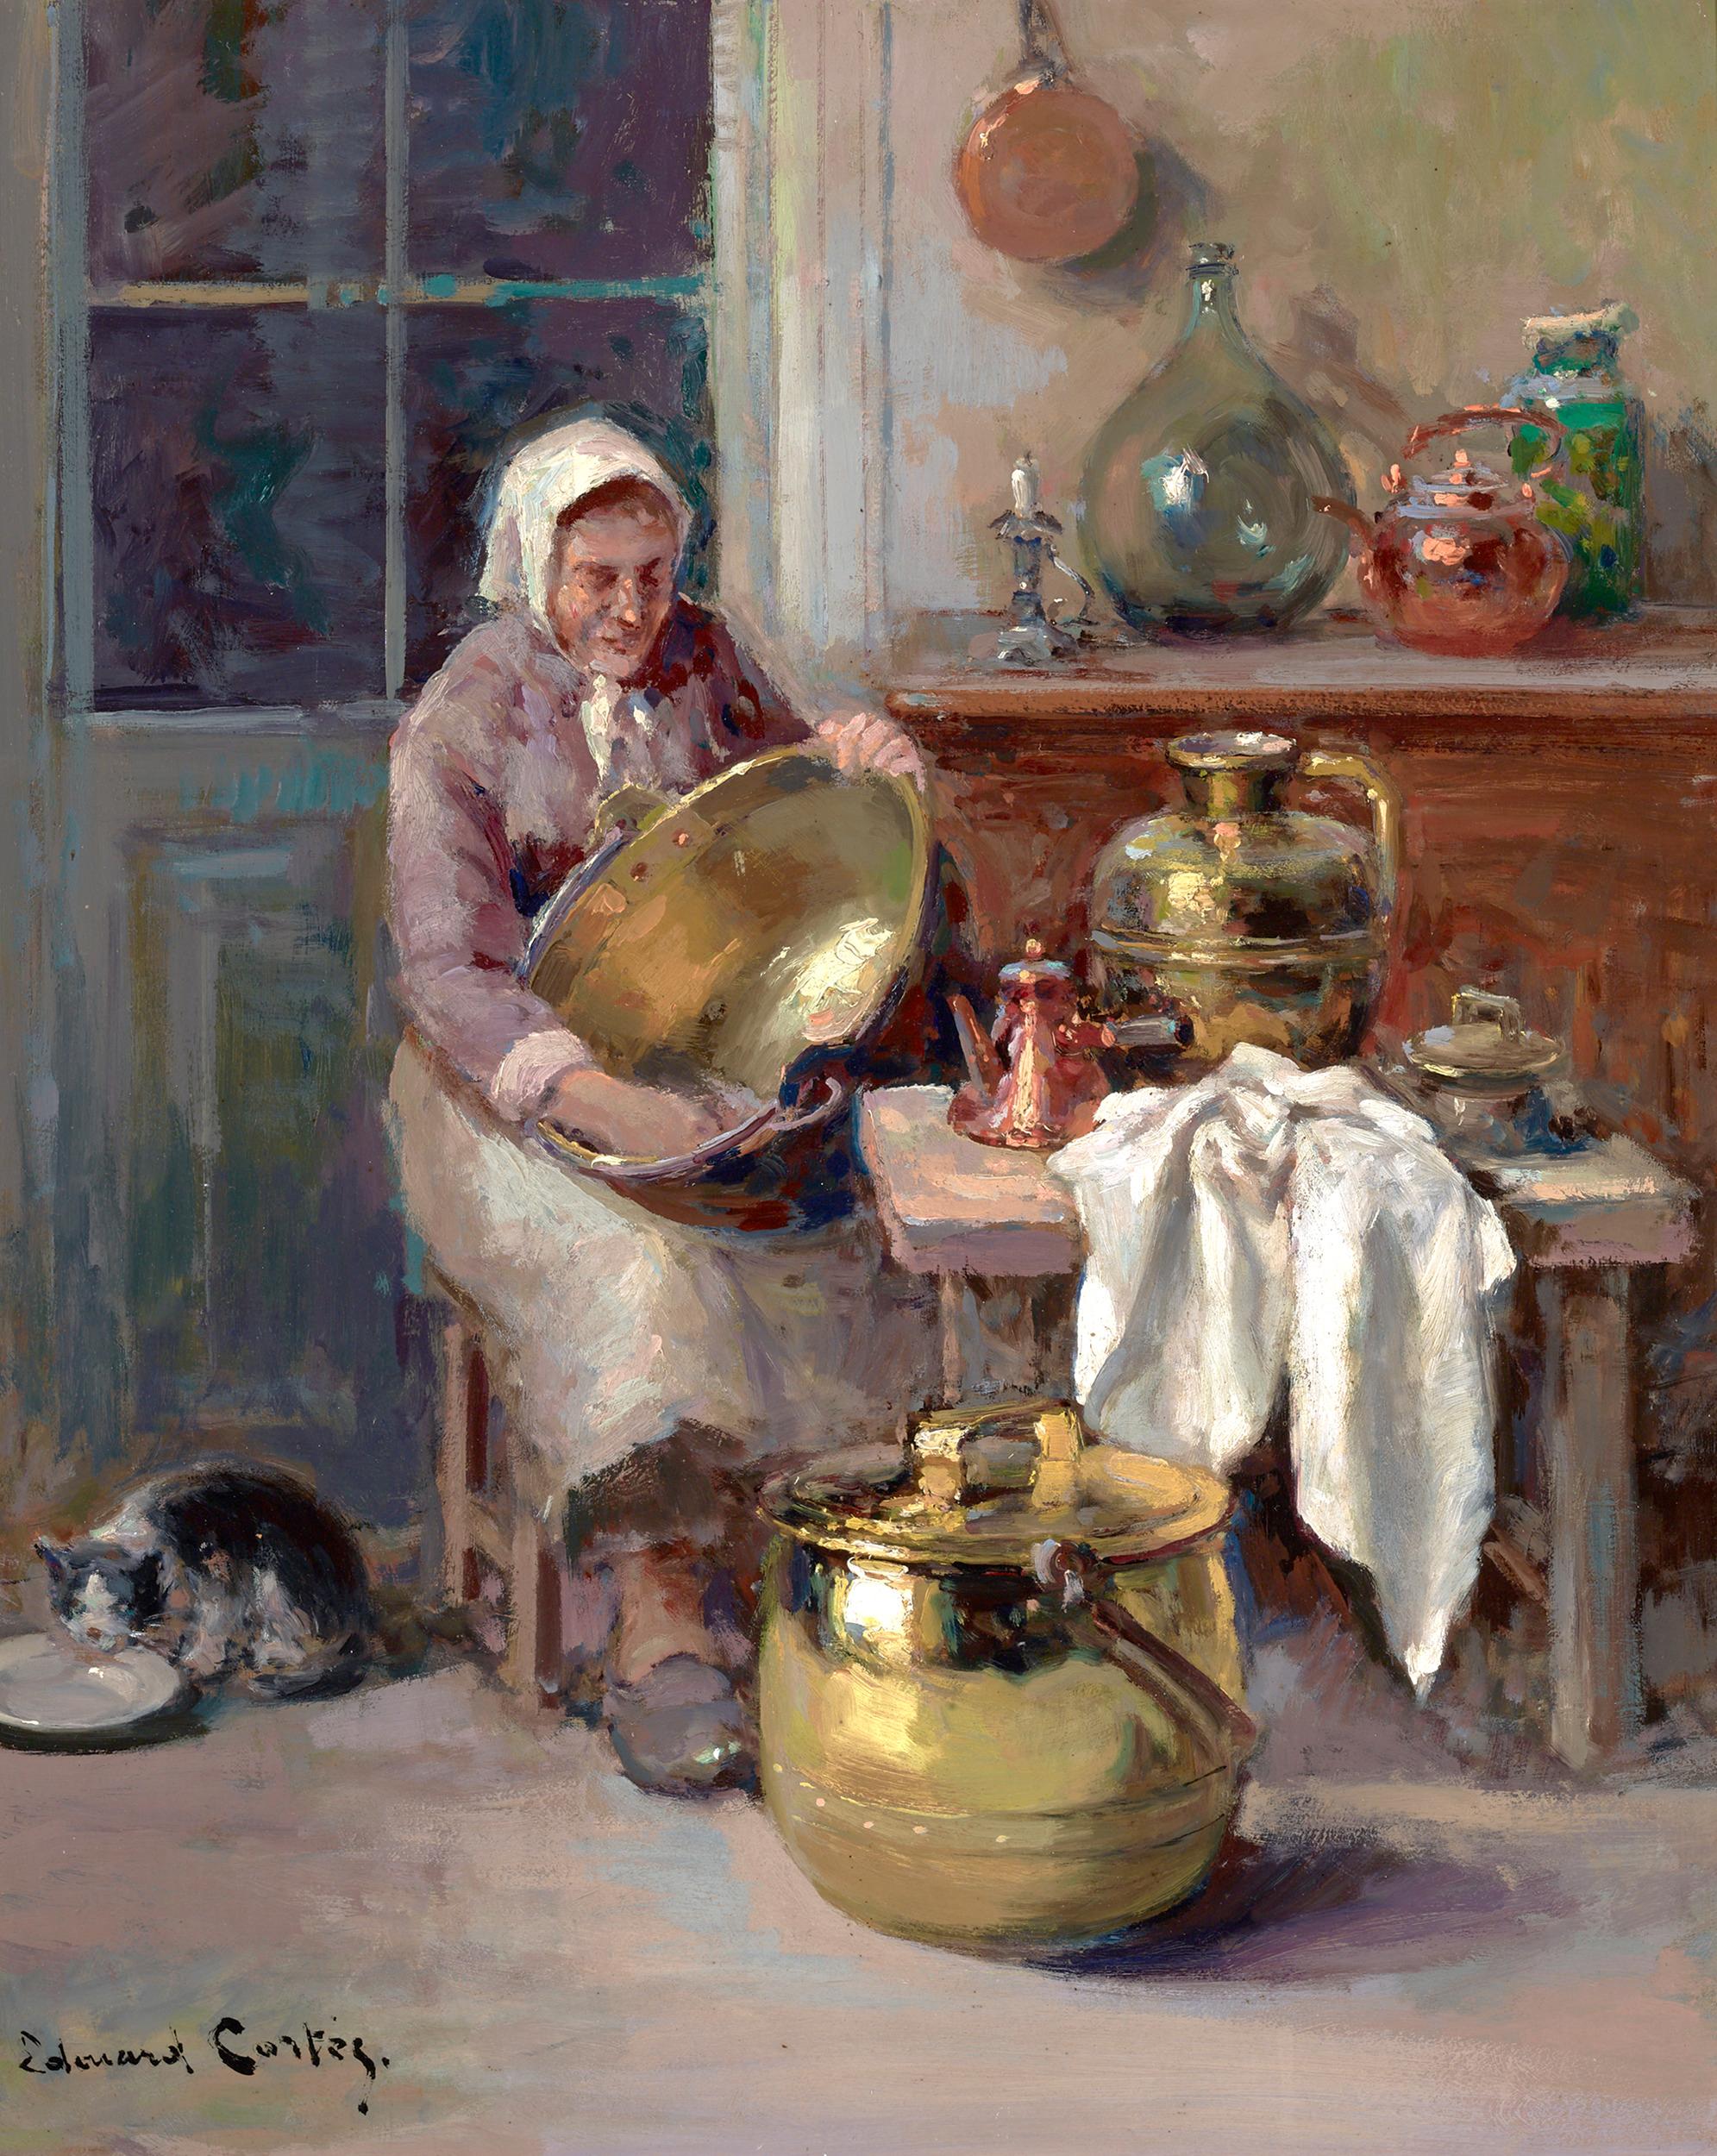 
French Post-Impressionist Edouard Léon Cortès captures a peasant woman scrubbing a large pot in this rare early work from the artist. Although Cortès is known for his scenes of bustling Parisian boulevards, an important portion of his body of work